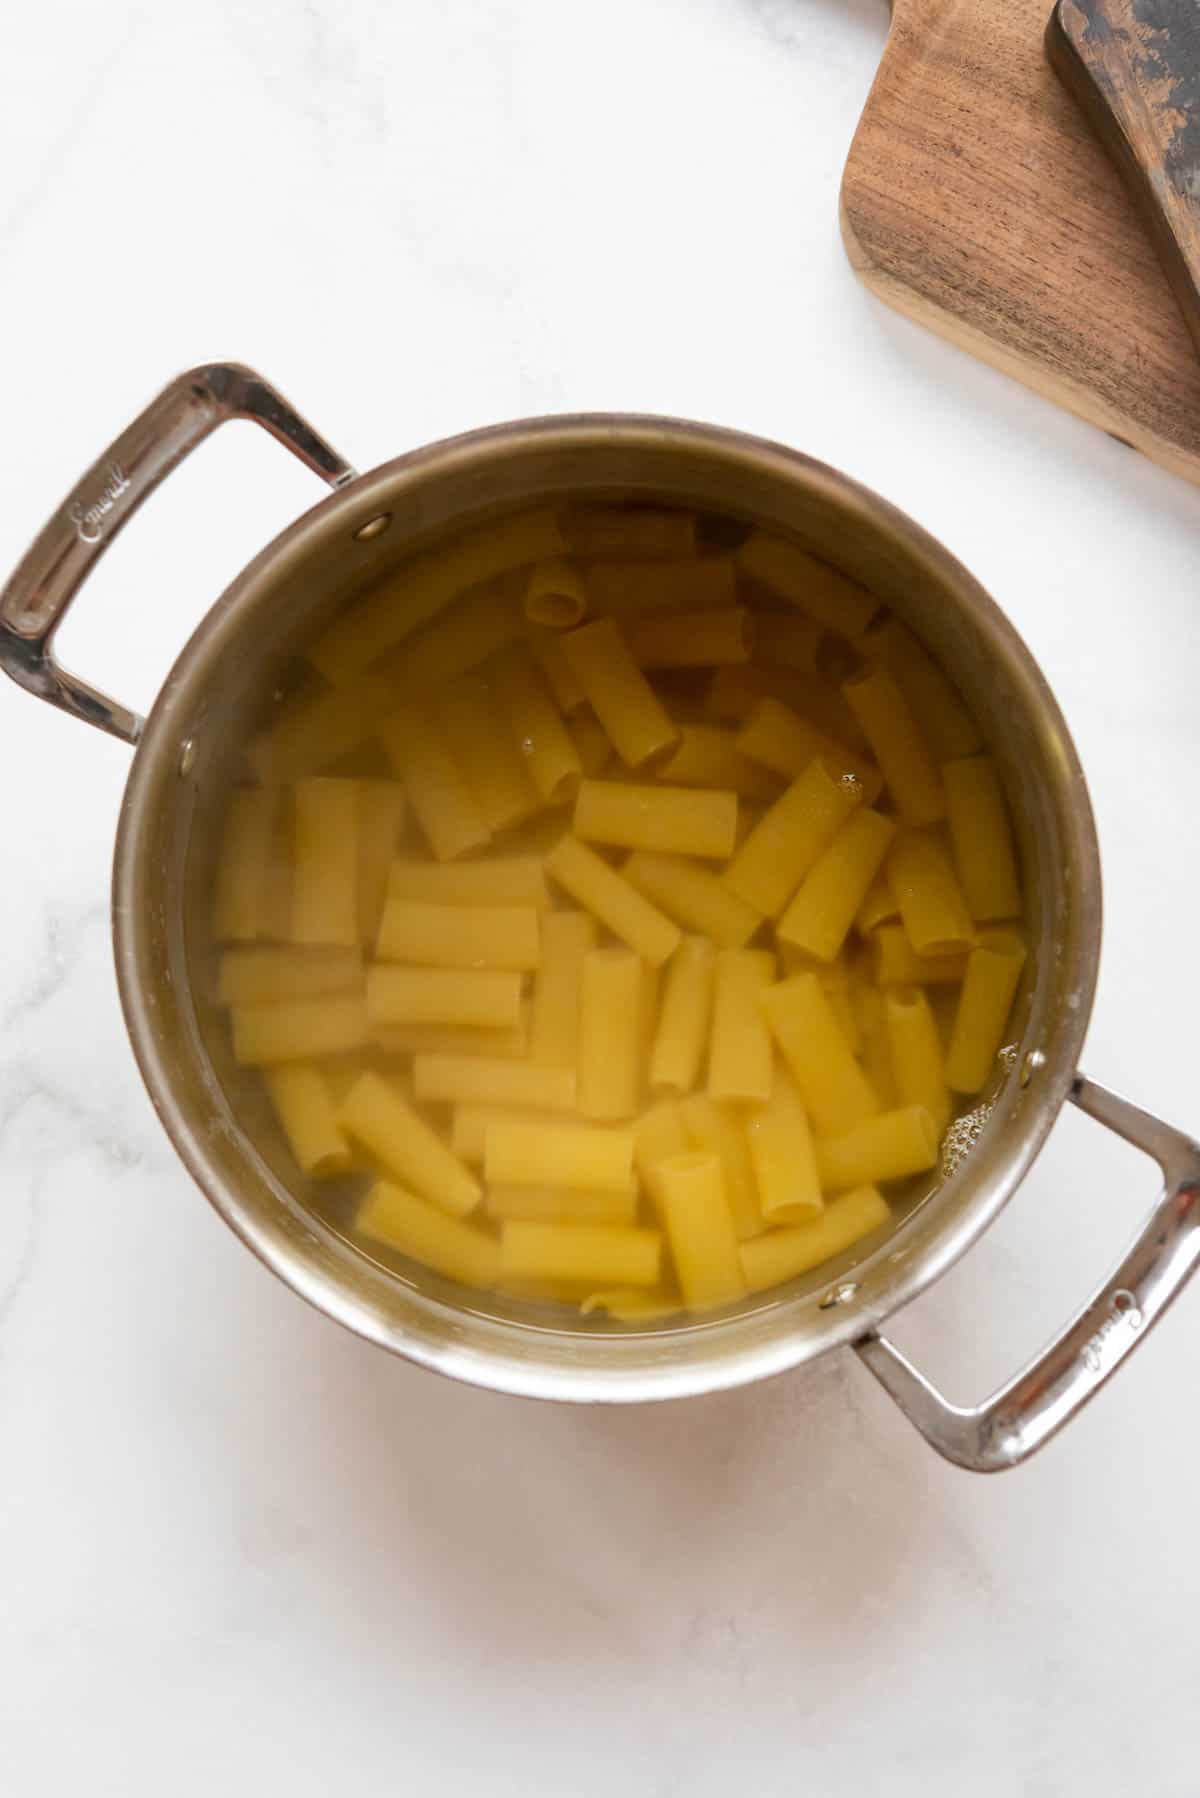 Cooking rigatoni pasta in salted water.